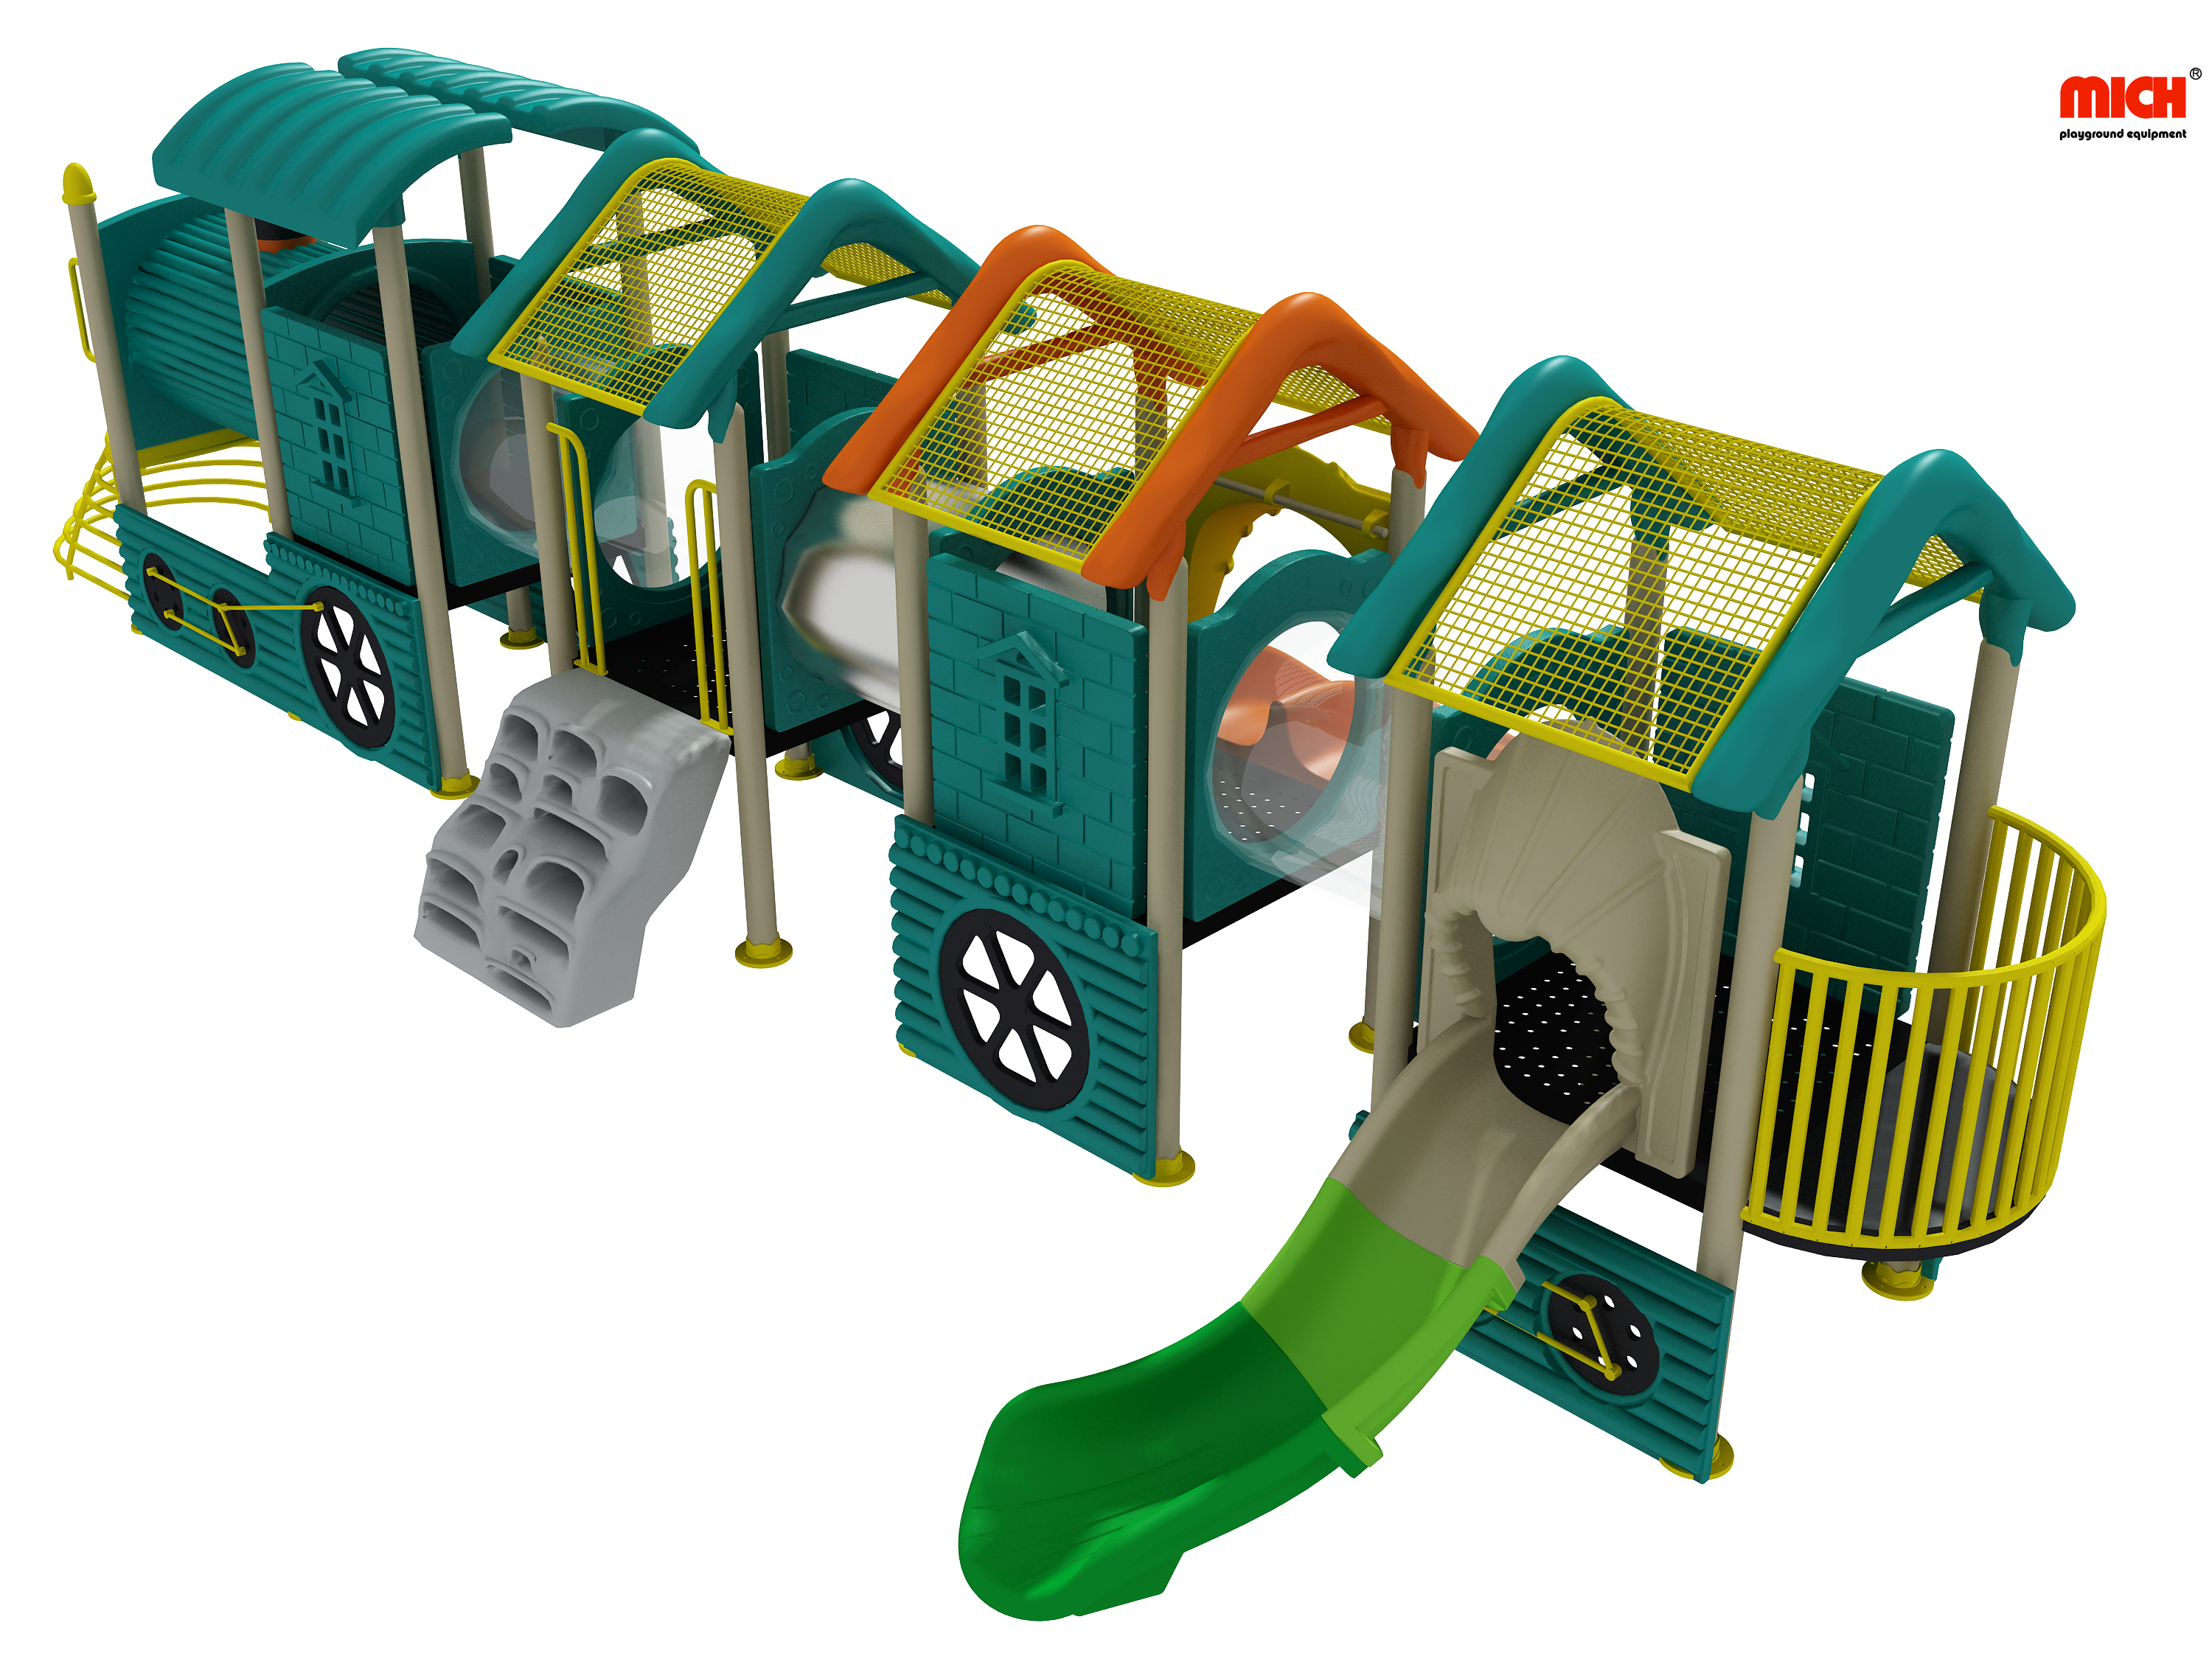 Train Shaped Toddler Outdoor Playground